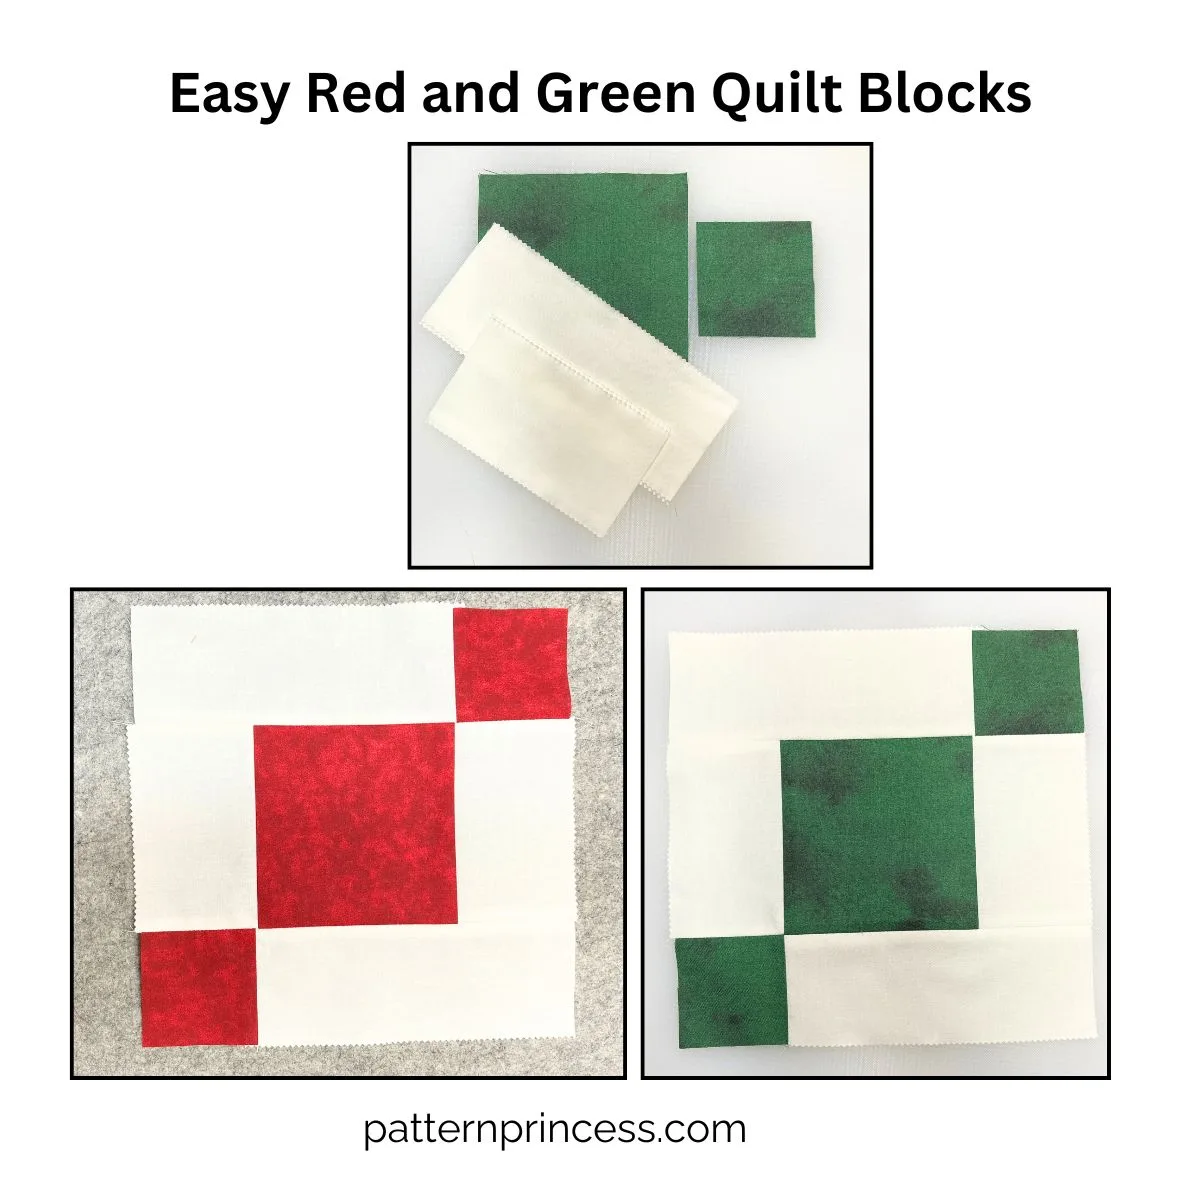 Easy Red and Green Quilt Blocks